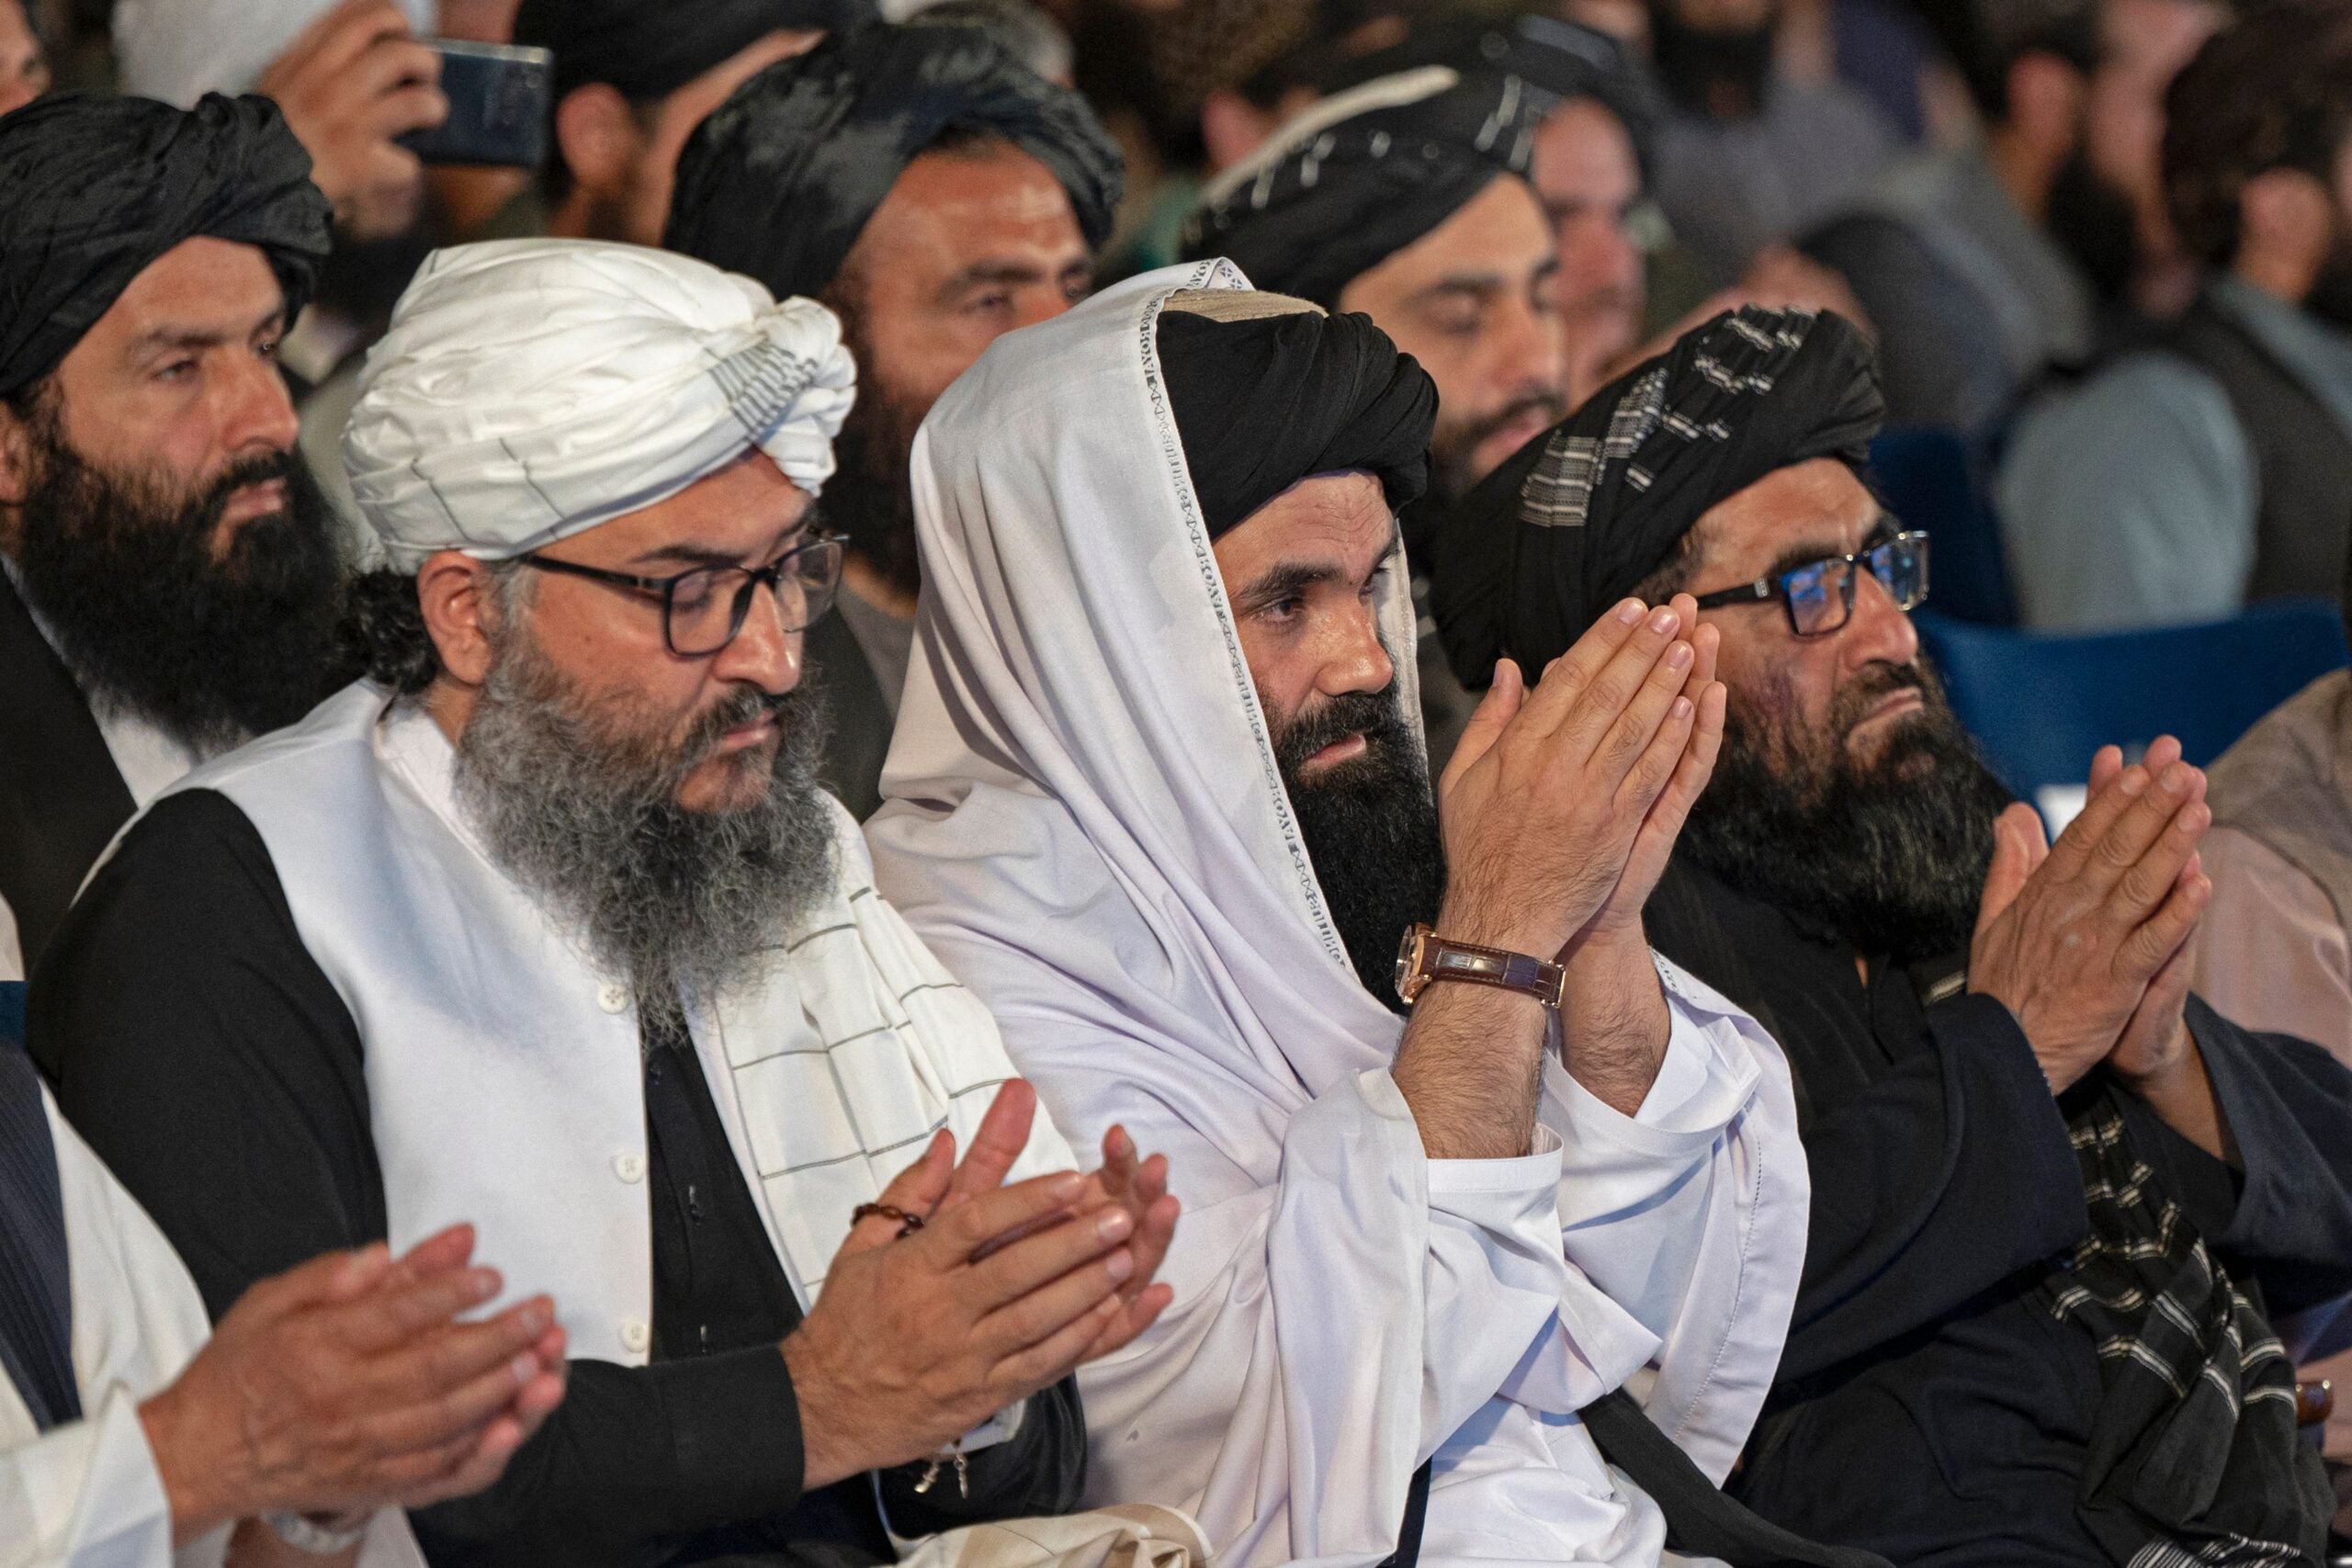 Taliban Interior Minister Sirajuddin Haqqani (C) prays during a ceremony marking the 30th anniversary of the Mujahideen, the 8th of Saur 1371 (28 April 1992) victory over the government of communist regime, in Kabul on April 28, 2022. (Photo by Wakil KOHSAR / AFP) (Photo by WAKIL KOHSAR/AFP via Getty Images)